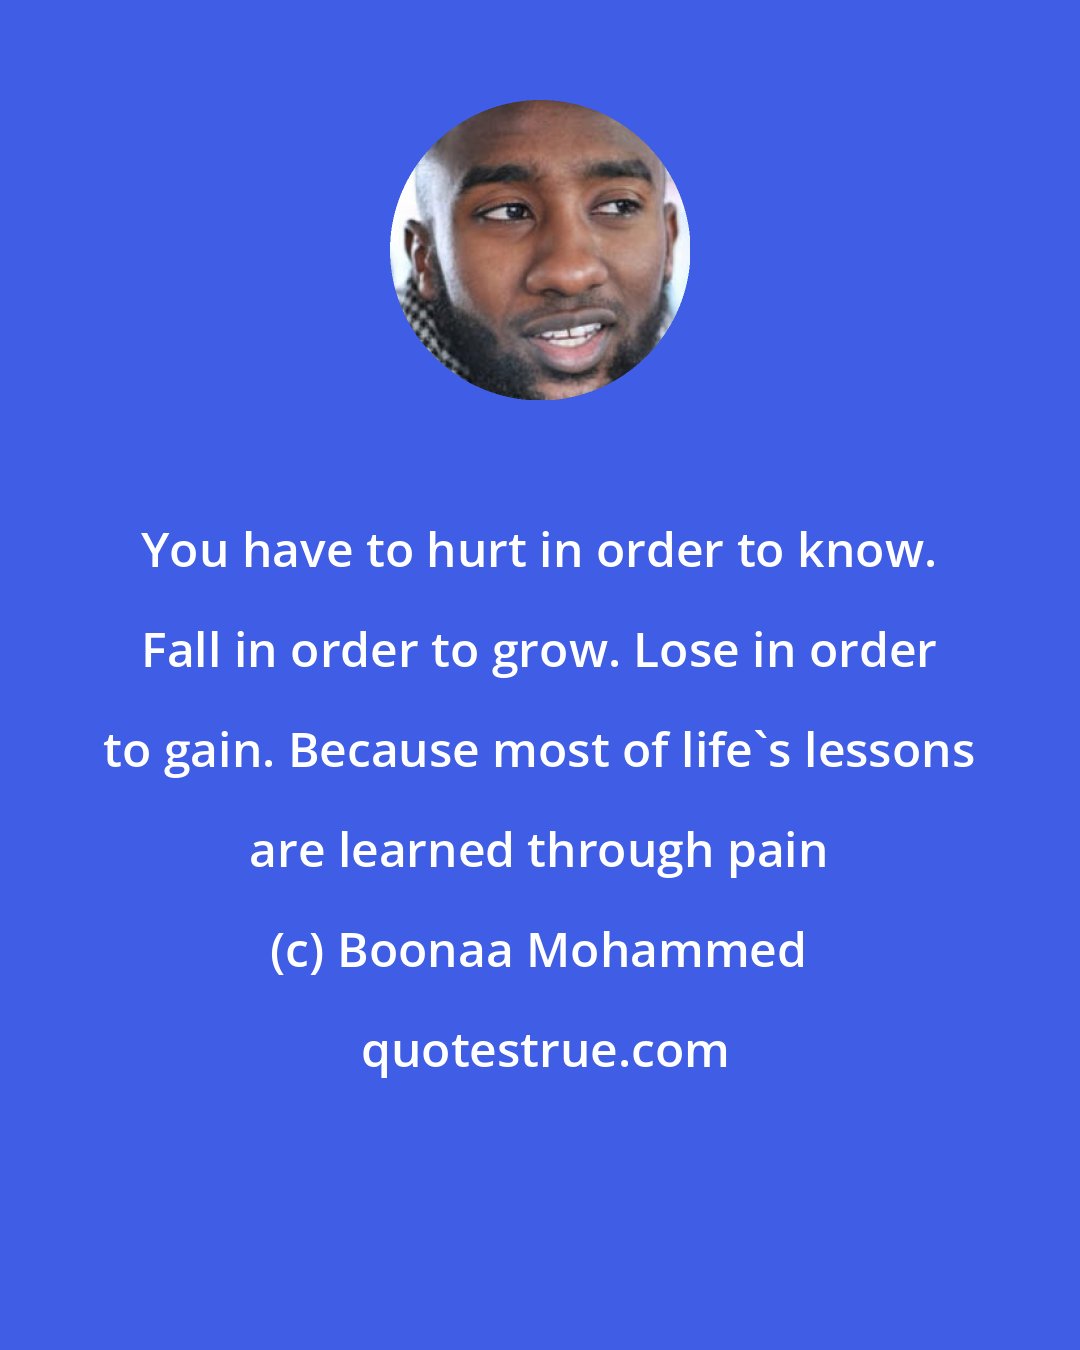 Boonaa Mohammed: You have to hurt in order to know. Fall in order to grow. Lose in order to gain. Because most of life's lessons are learned through pain